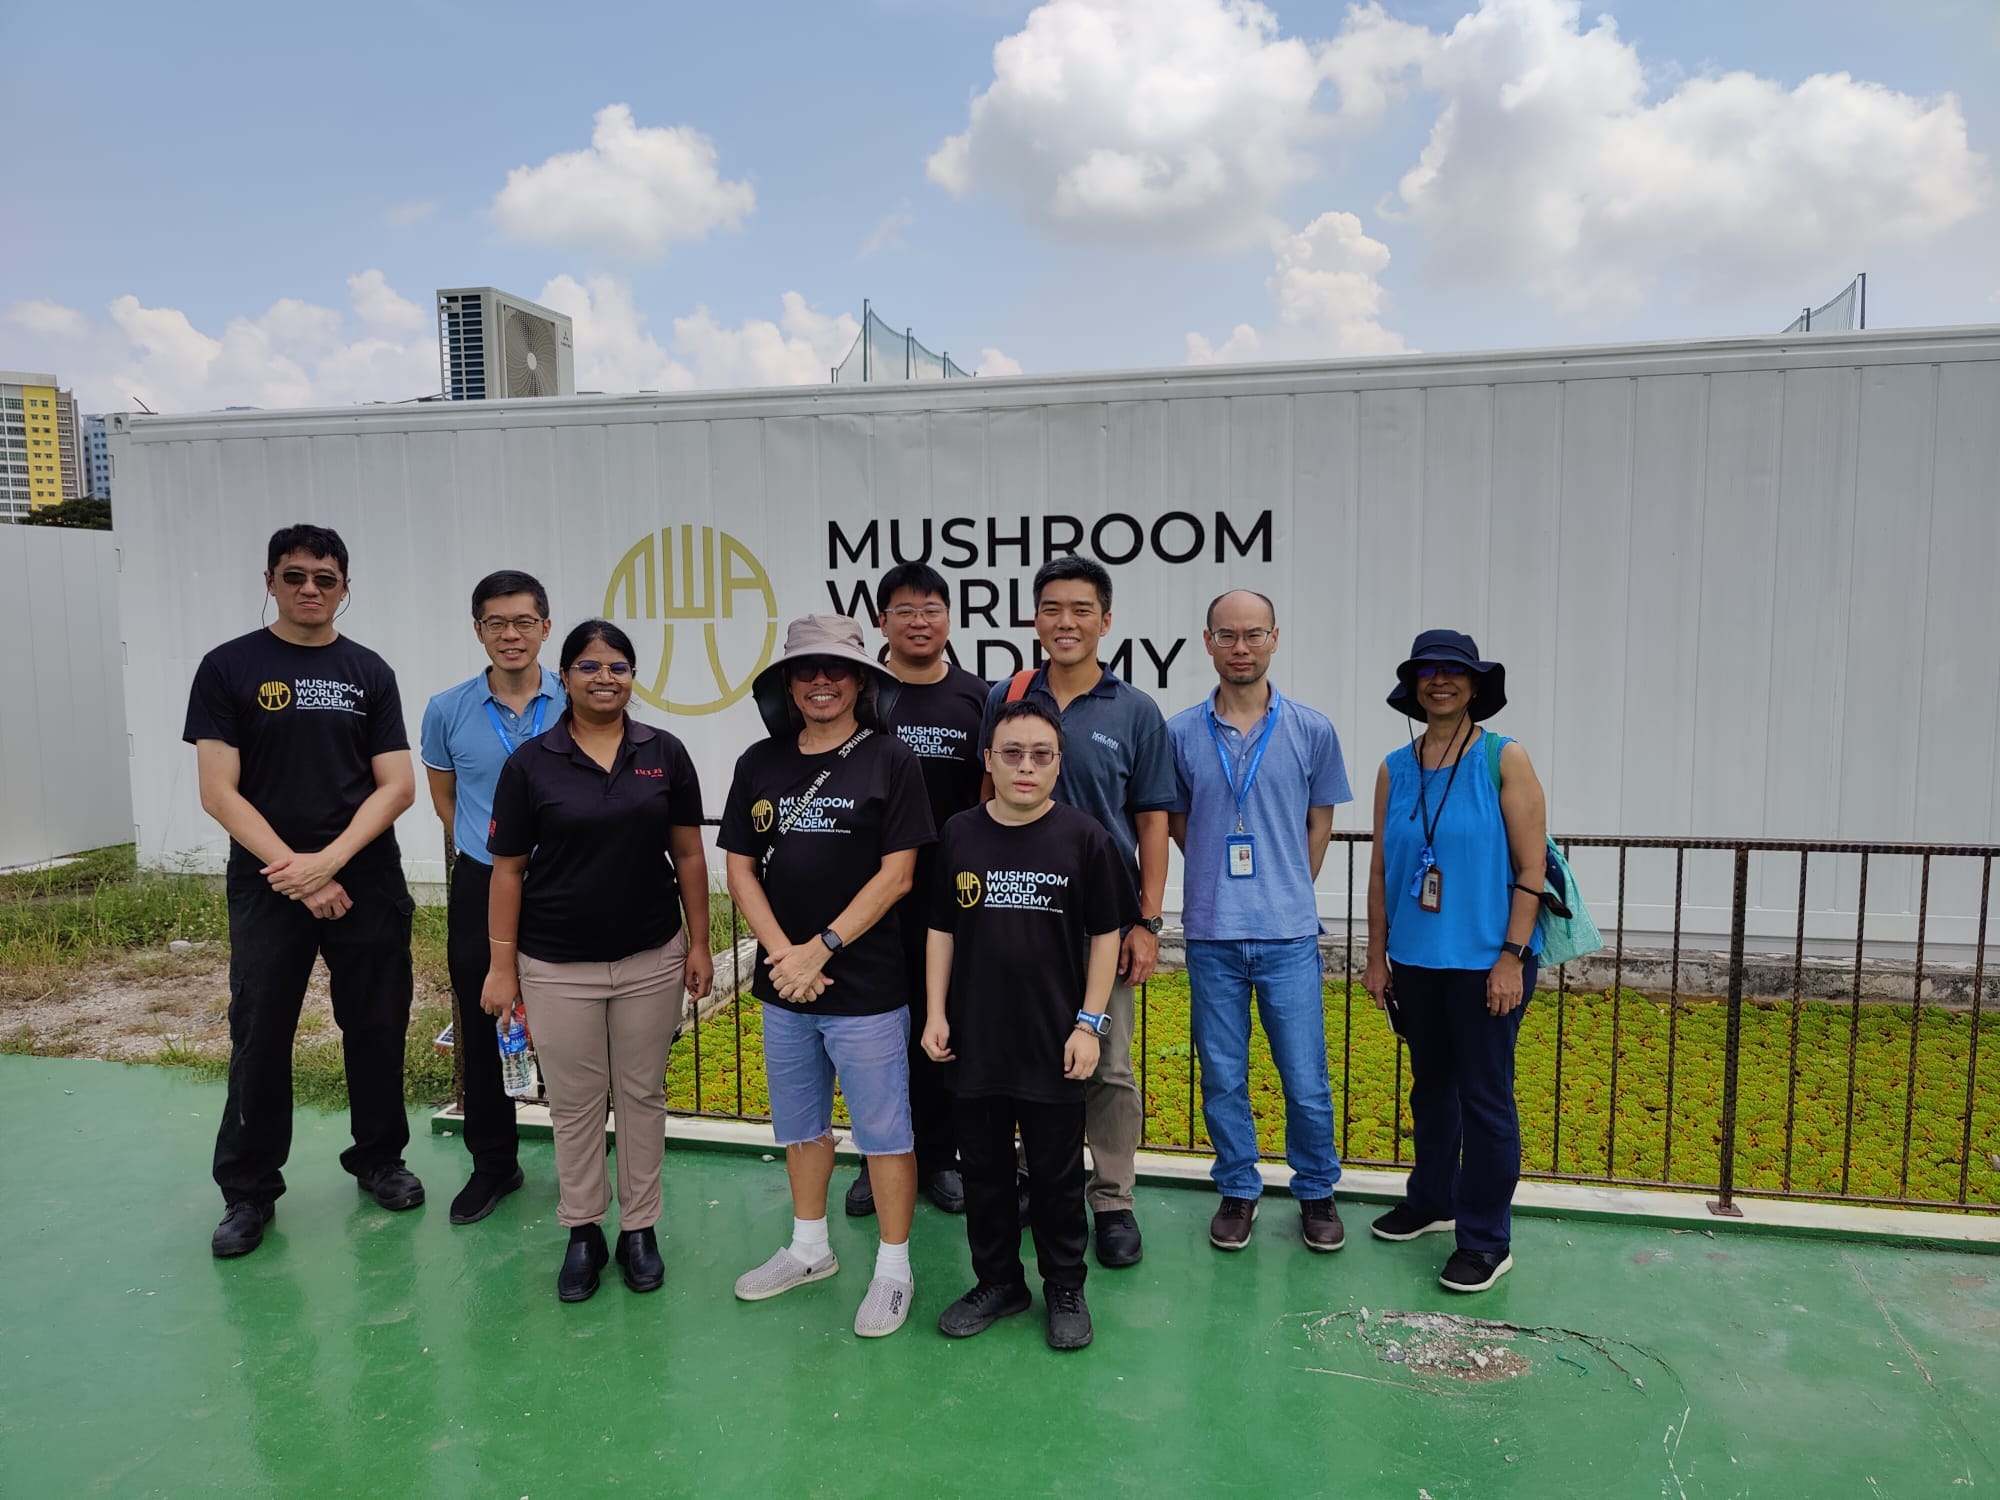 Dr. Kenneth Lee, Deputy Director at ARPA & Tech.
Dr. Teo Kim Tat, Assistant Director for Tech & Industry.
Ms. Mariam, Assistant Director for CE, Seahmala and Jen Yan, who have graced our Fungi Agriculture Center of Innovation with their visit.